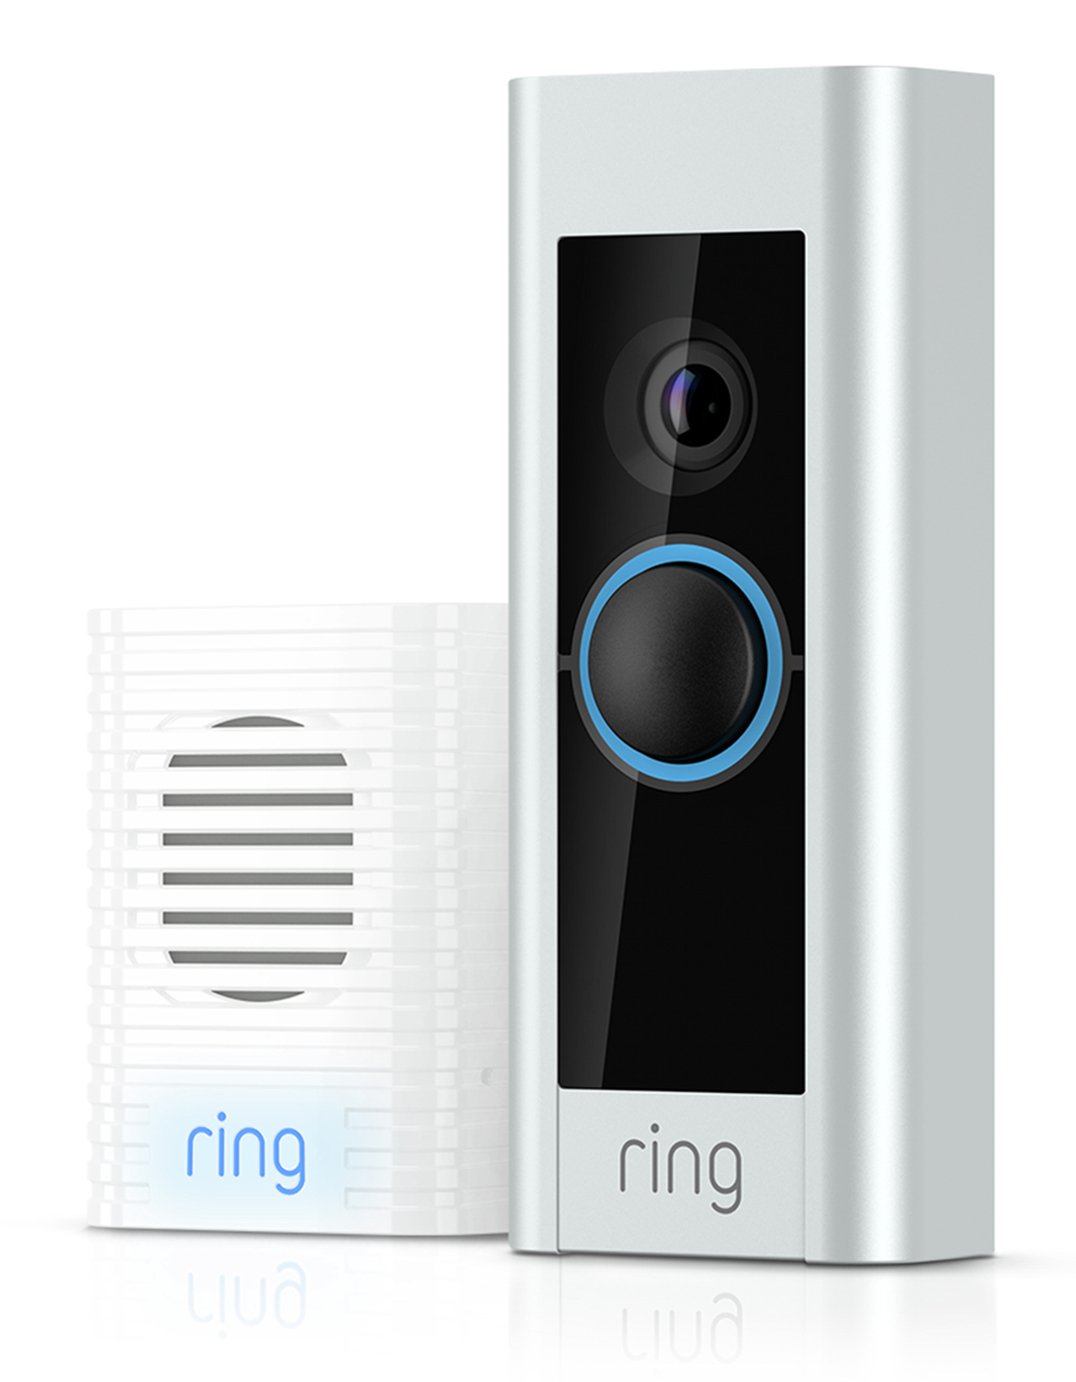 ring video doorbell where to buy